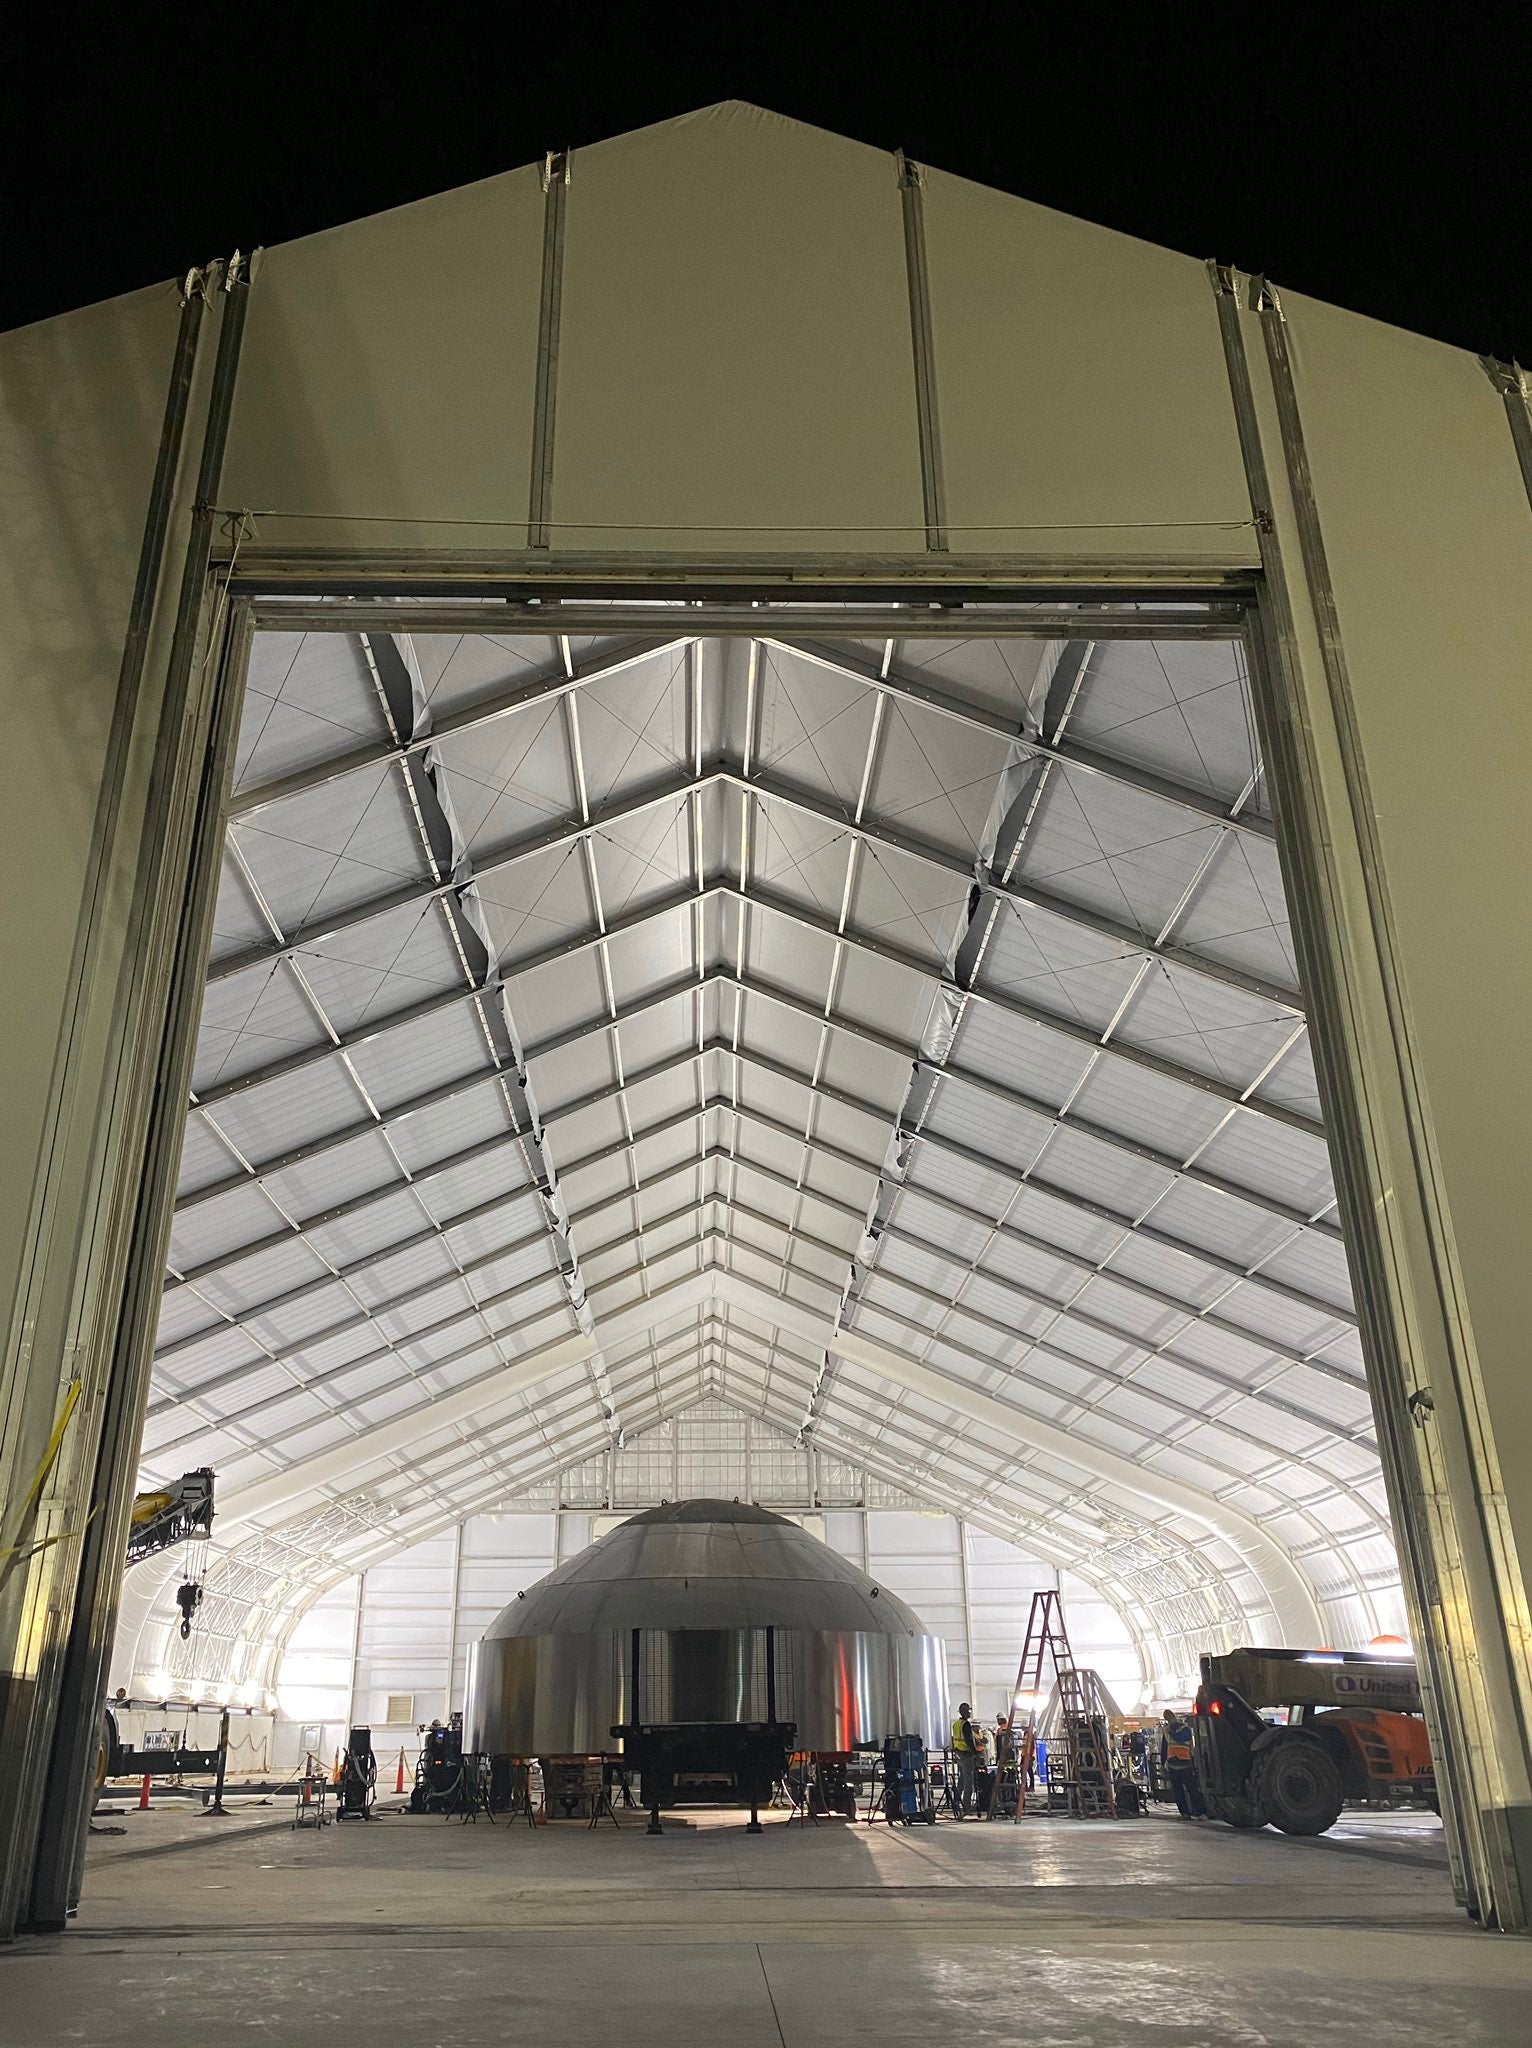 Elon Musk shares photo of SpaceX's new Starship assembly building in Boca Chica Texas